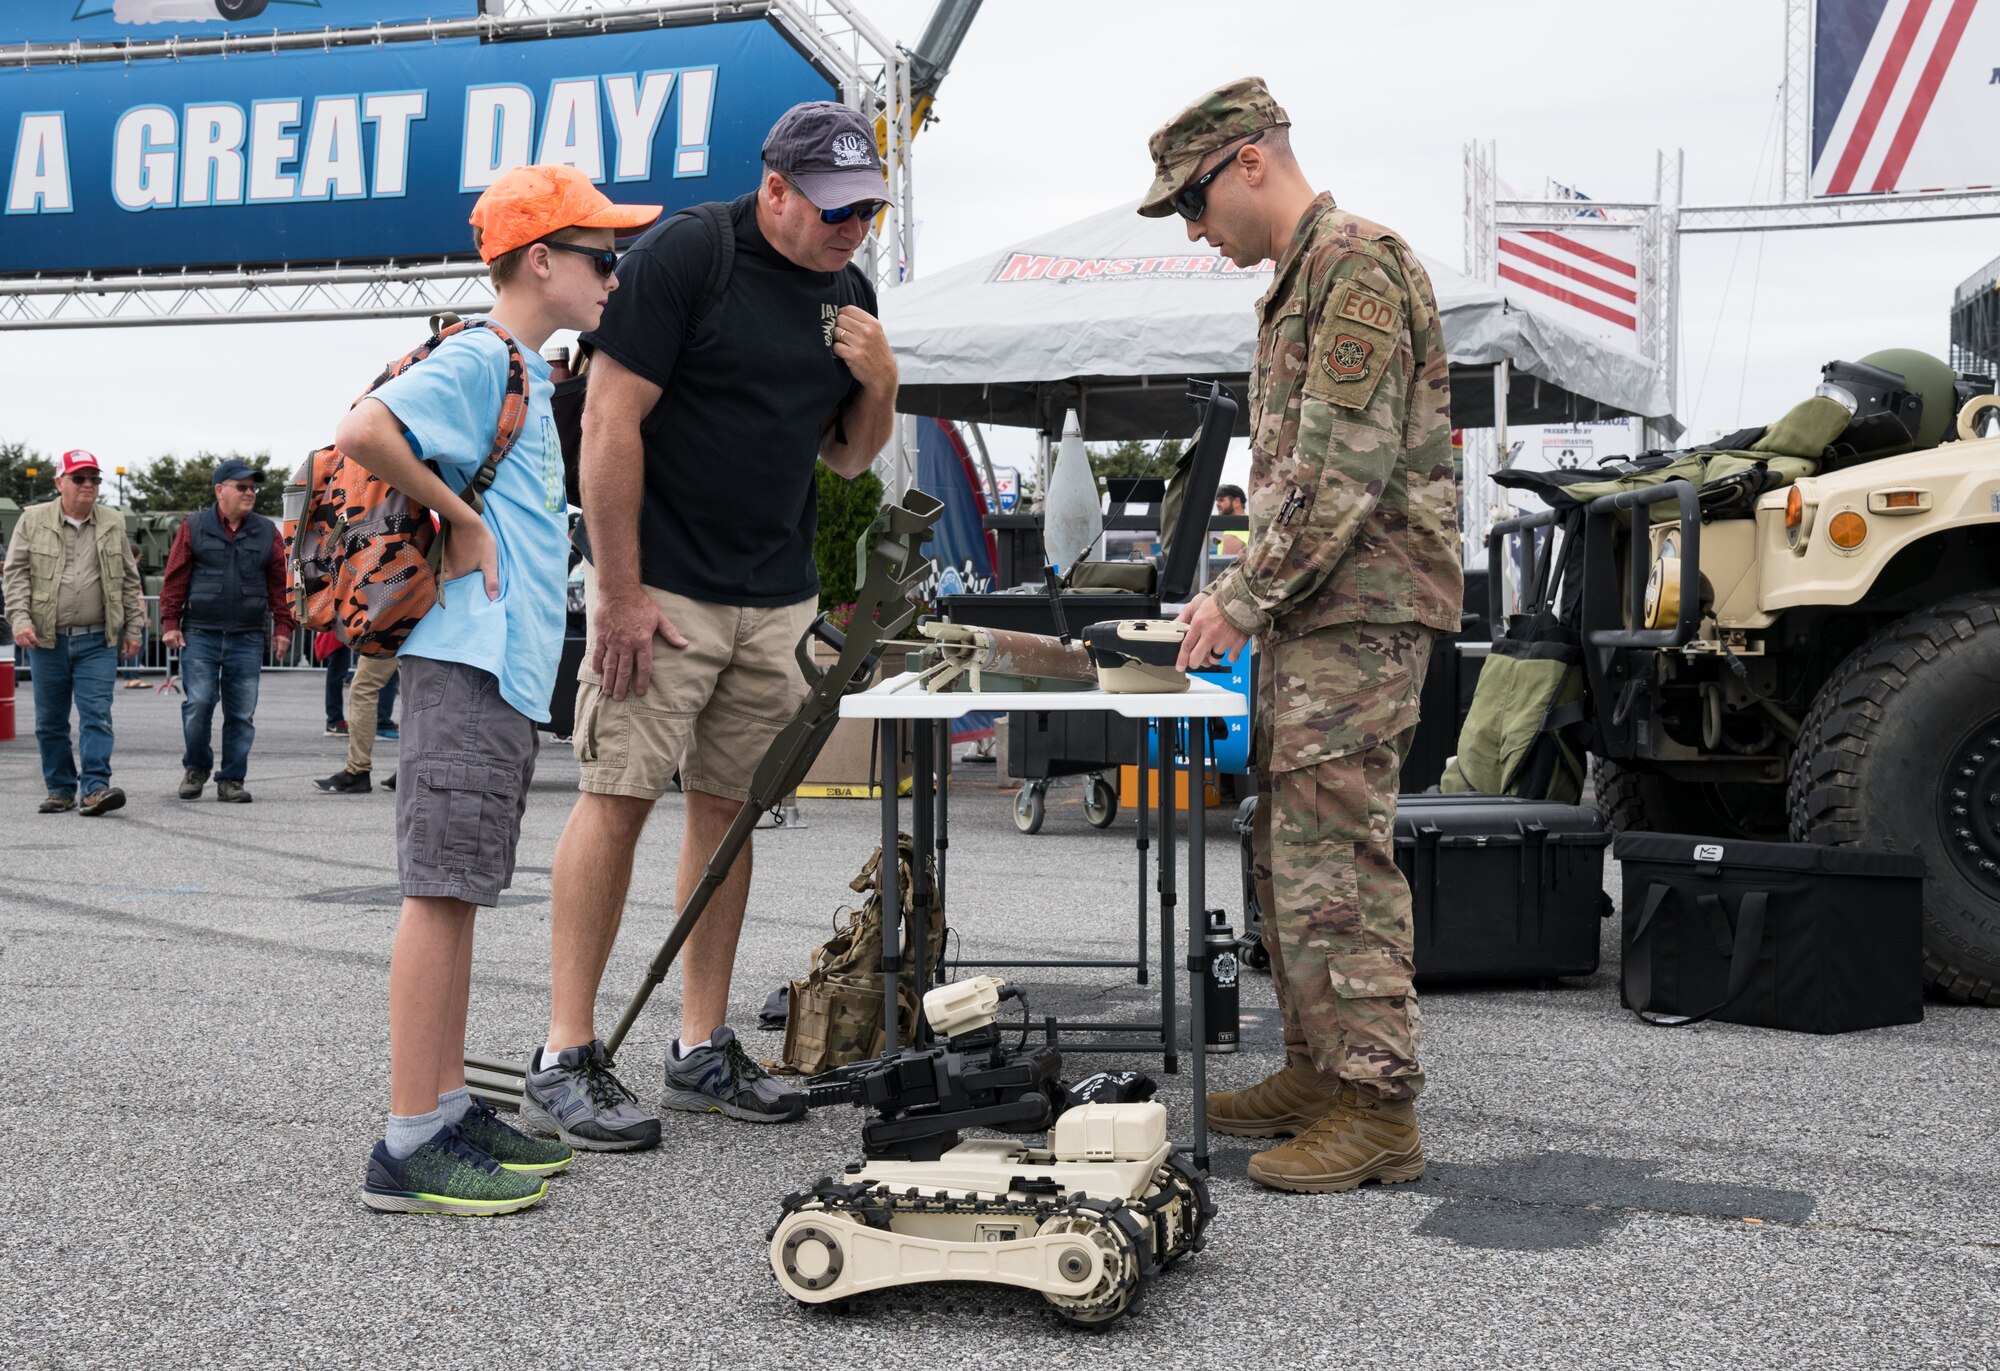 Staff Sgt. Andrew Vitale, 436th Civil Engineer Squadron explosive ordnance disposal craftsman, answers questions from race fans Oct. 6, 2019, at Dover International Speedway, Dover, Del. Members from the 436th CES EOD, Fire Department and 436th Security Forces Squadron set up equipment and vehicle static displays in the Monster Mile Youth Nation area. (U.S. Air Force photo by Roland Balik)